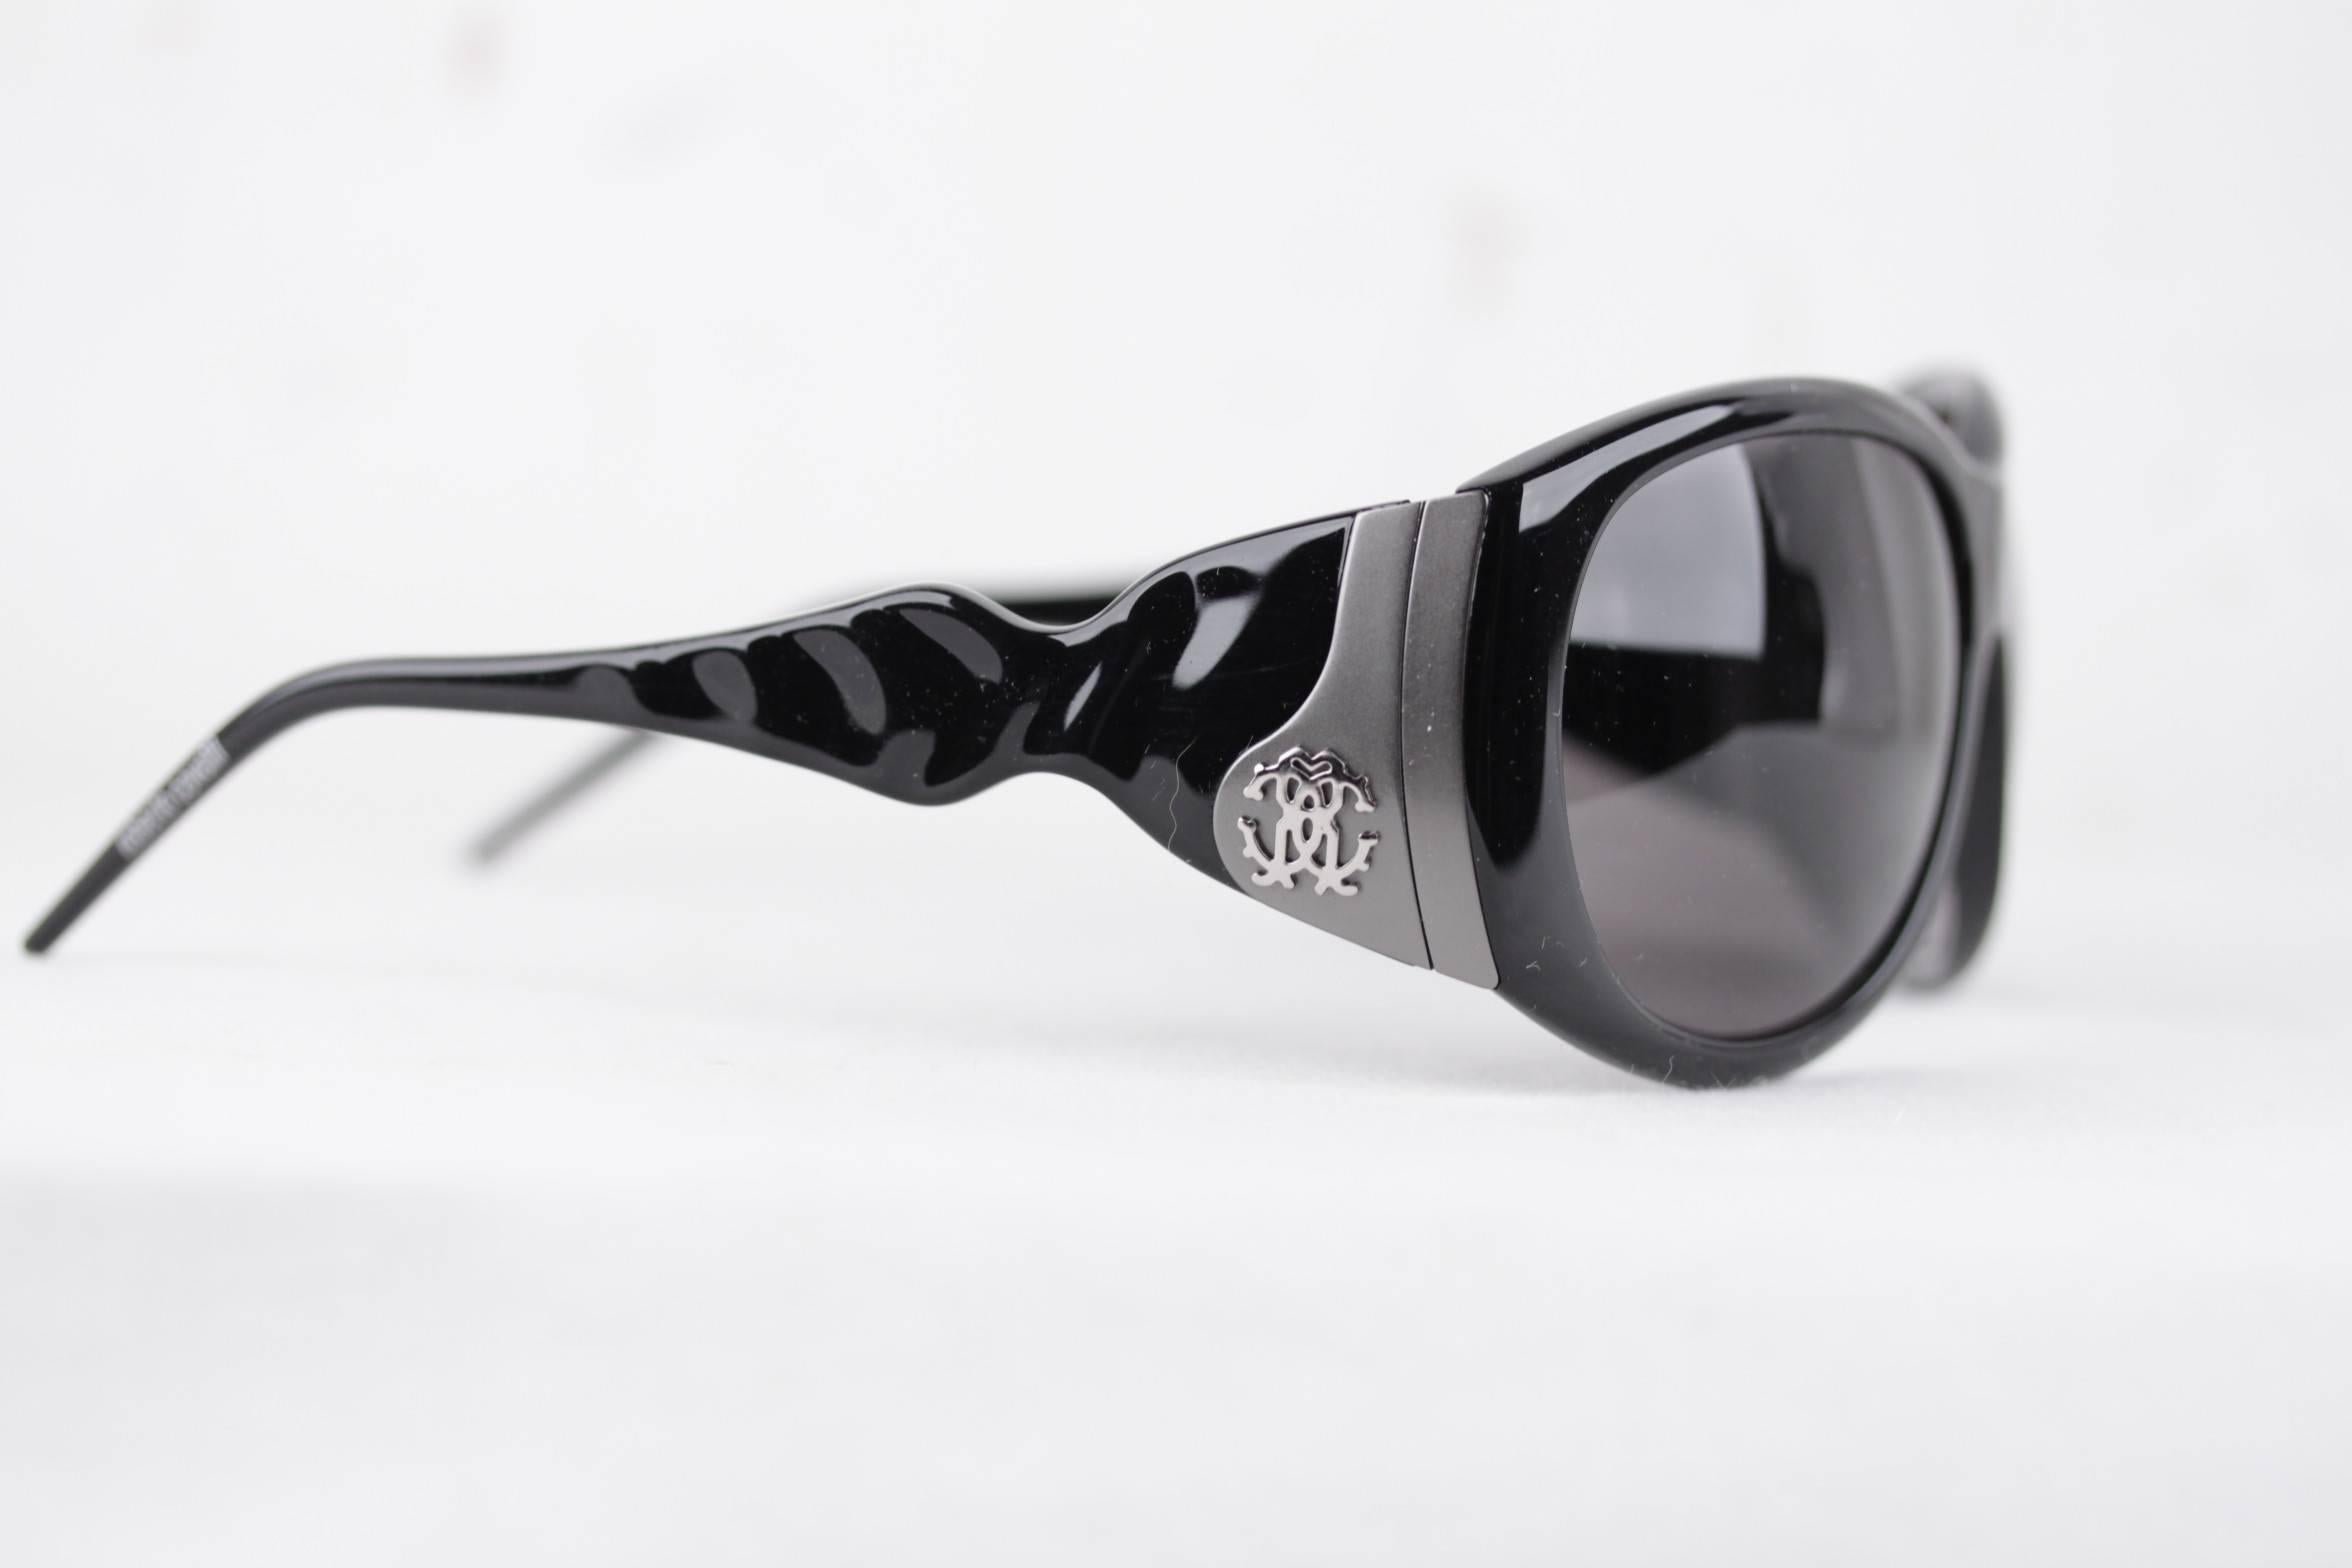 
- ROBERTO CAVALLI - Made in Italy

- Black oversized wrap frame, with silver metal CAVALLI logo on both sides, on a gray finish - Smoke blue lens

- Model refs: CARITE 288S - B5 - 59/15 -  130

- signed CAVALLI 100% UV protection original